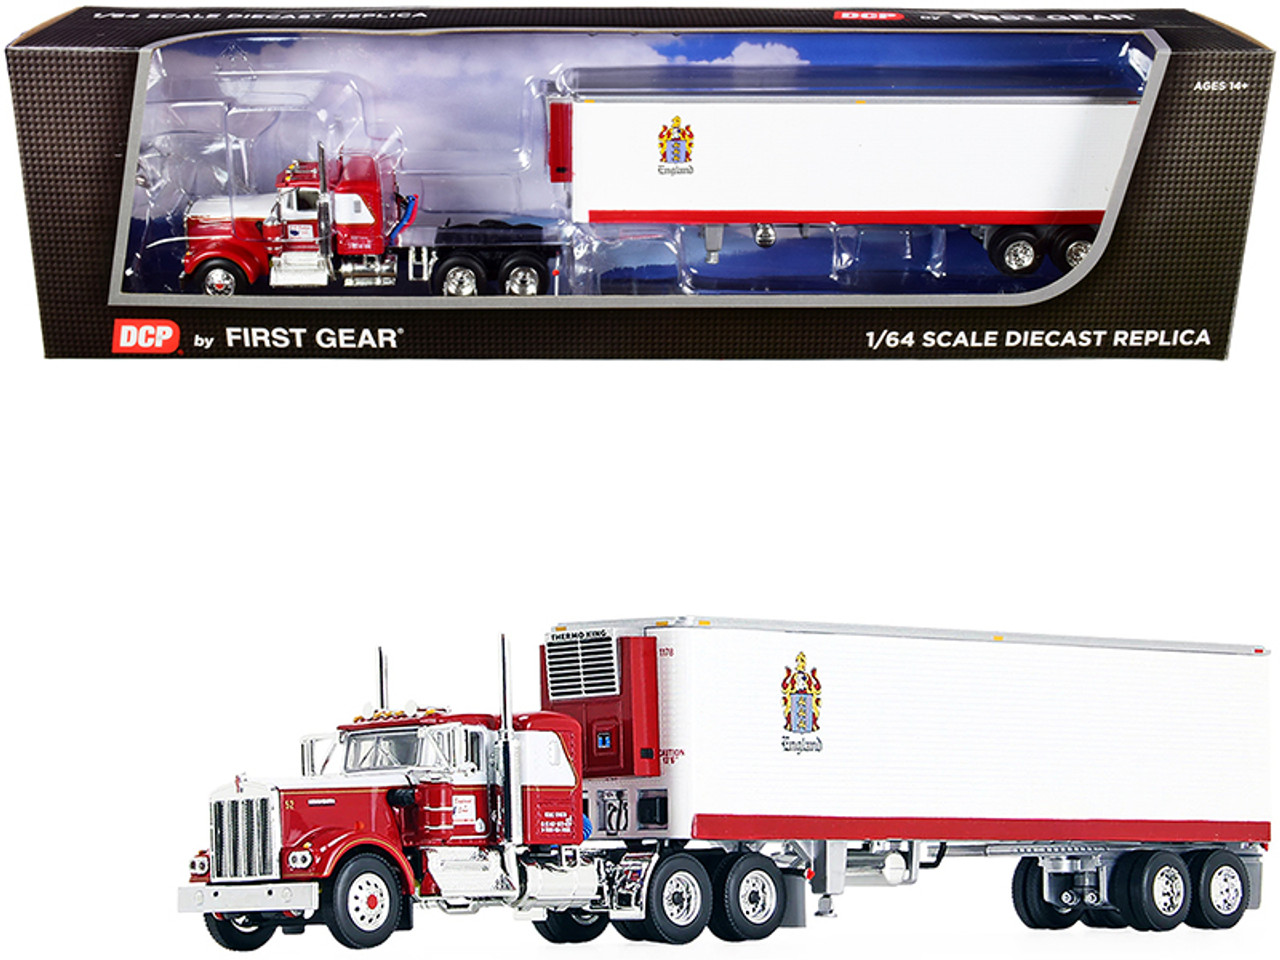 Kenworth W900A with 36" Flattop Sleeper Cab and 40' Vintage Reefer Refrigerated Trailer "C.R. England" Red and White 1/64 Diecast Model by DCP/First Gear